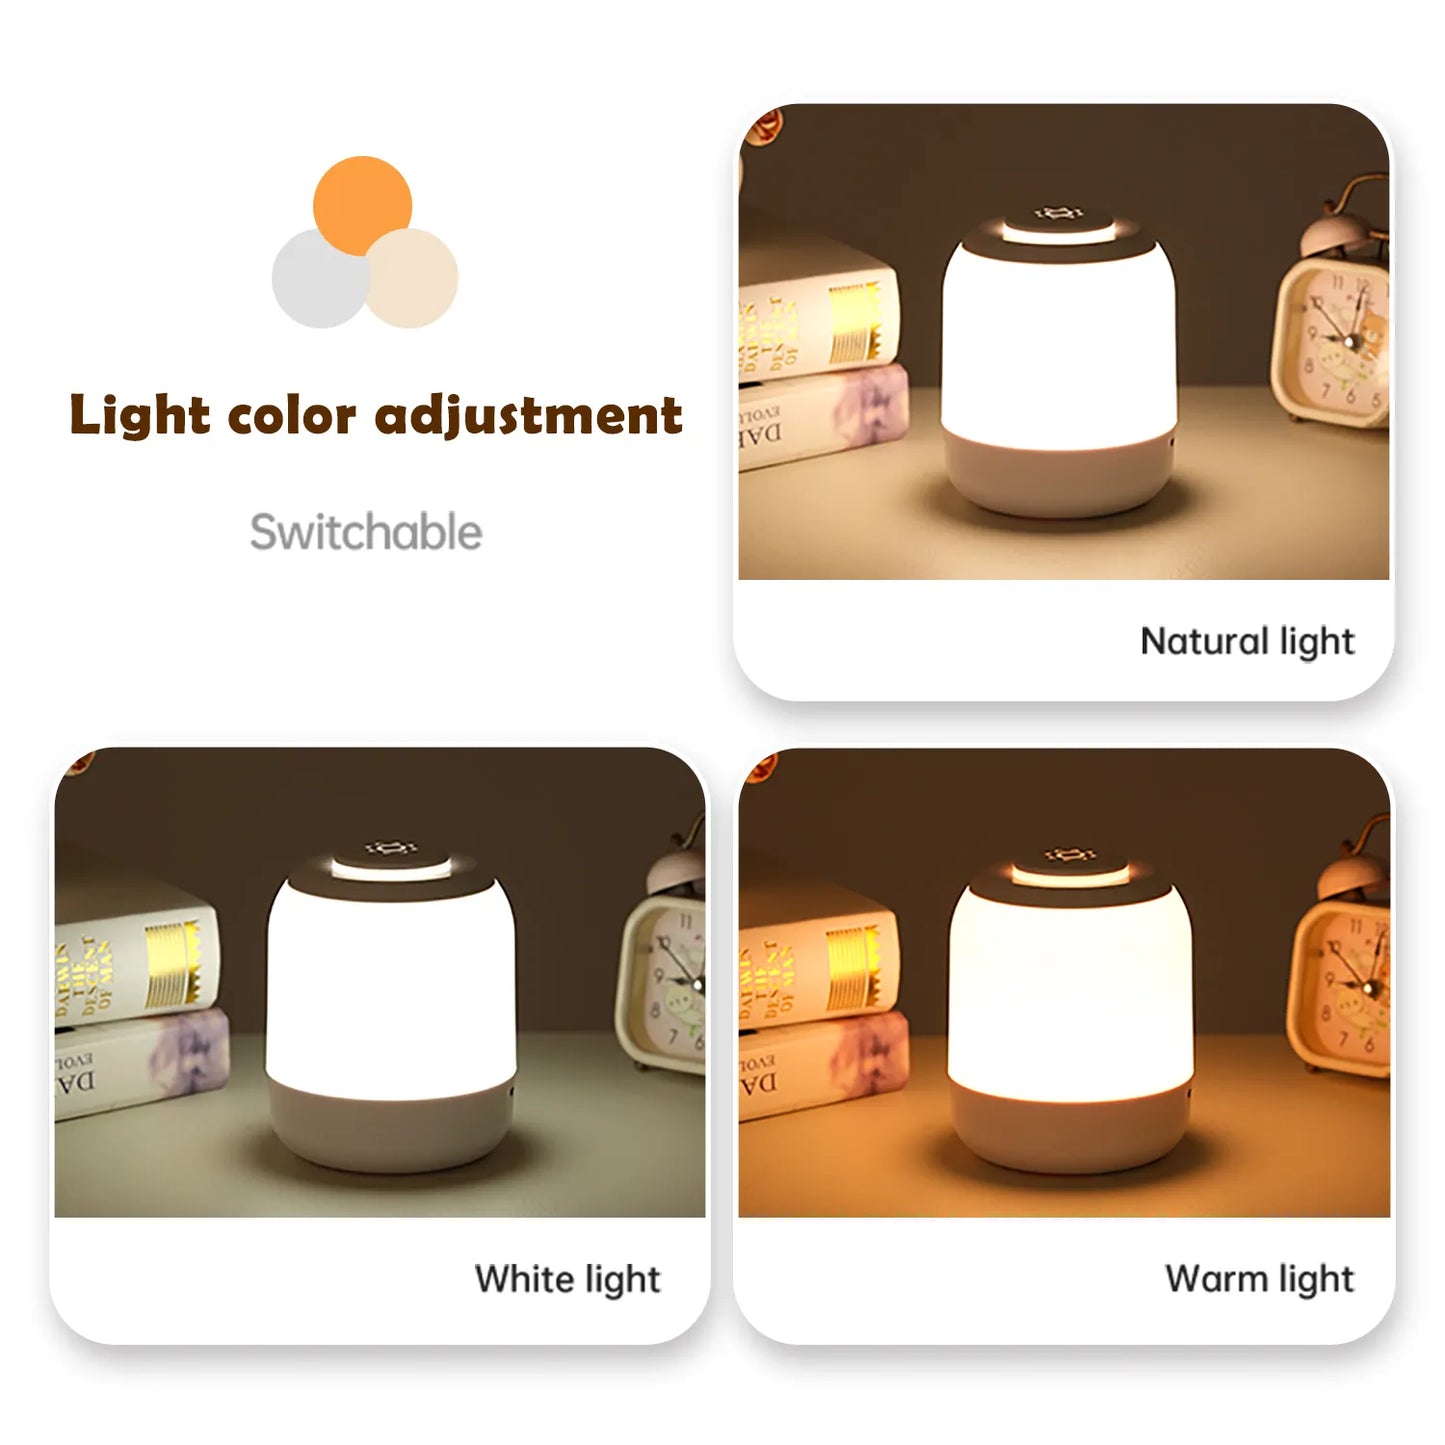 Led Touch Night Light Portable Bedside Lamp Dimming Baby Sleeping Lamp 3 Color with Touch Sensor light for Living Room Bedroom